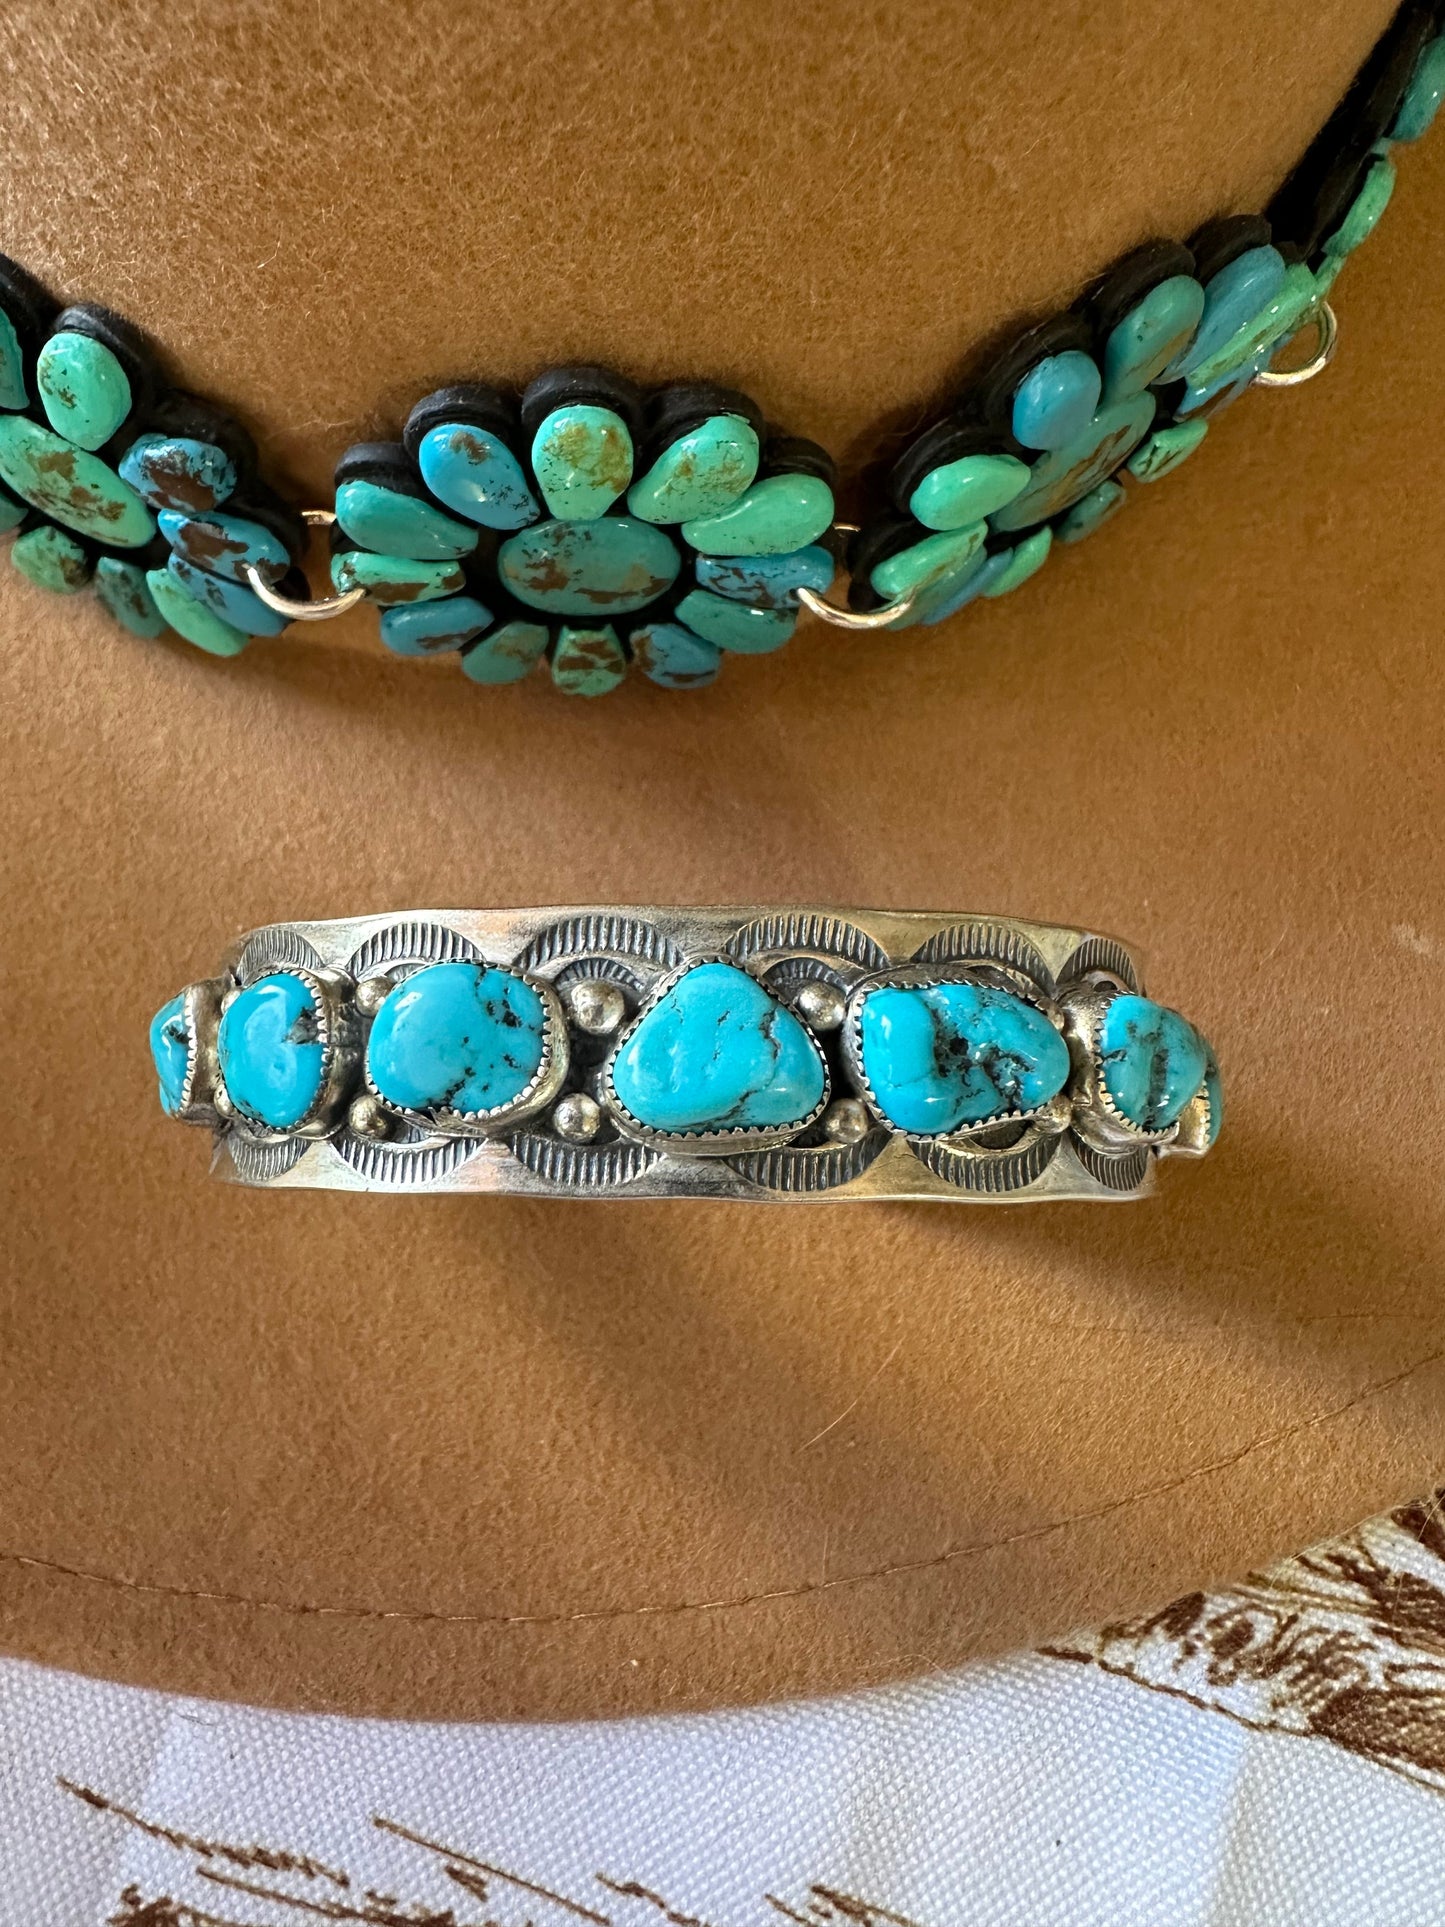 Navajo Turquoise & Sterling Silver Cuff Bracelet Signed B Shorty